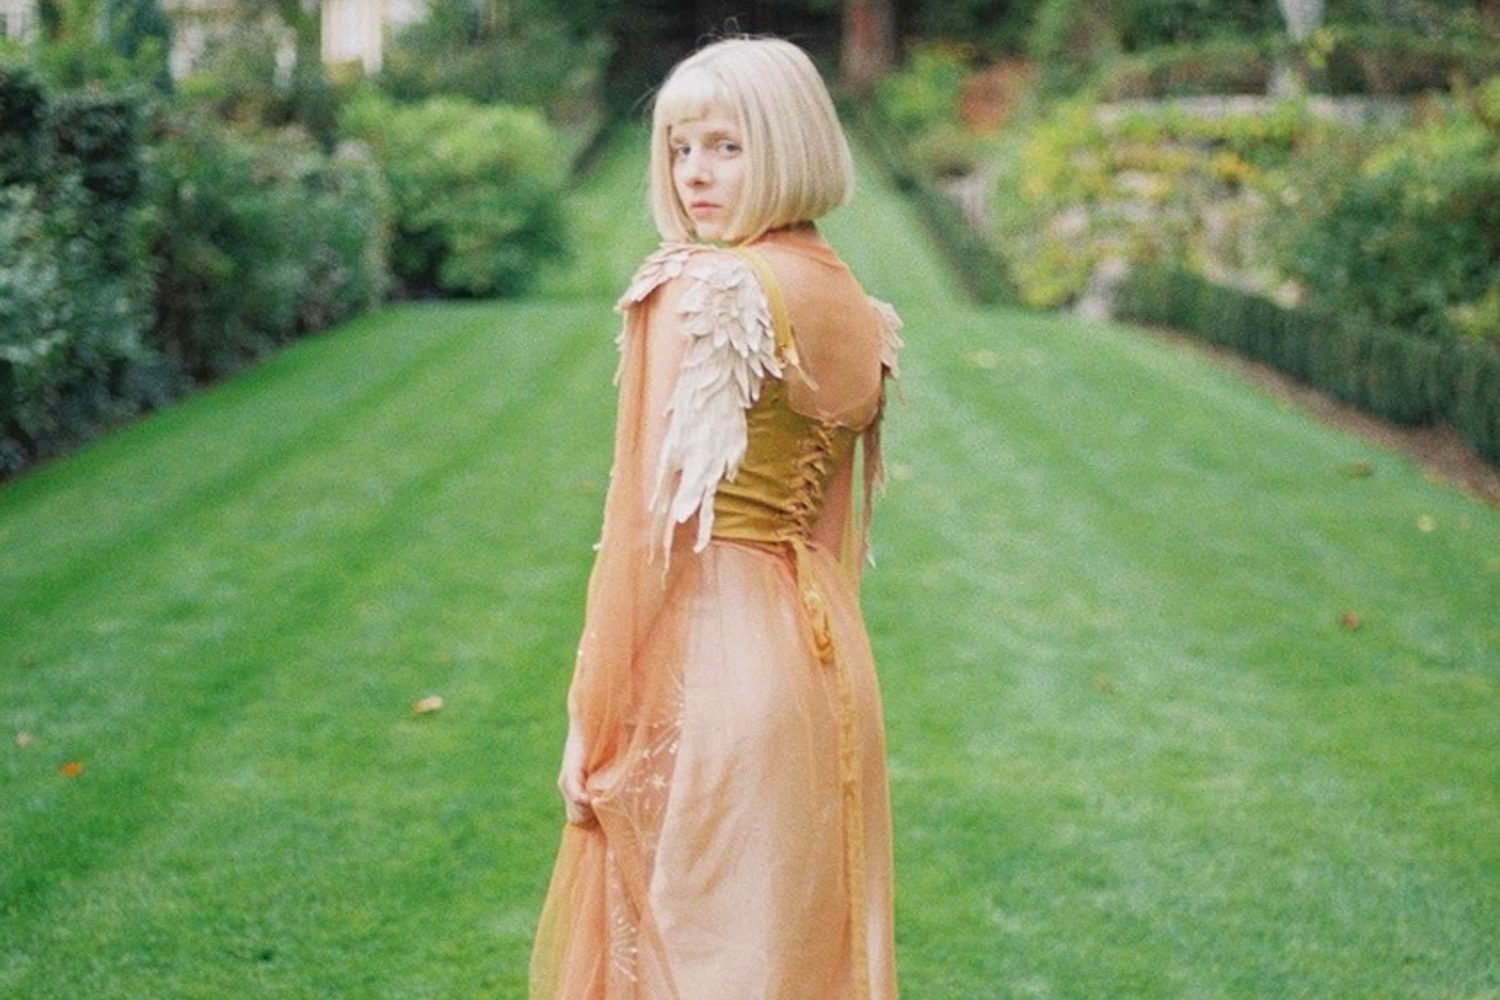 Aurora releases ‘Giving In To The Love’ video